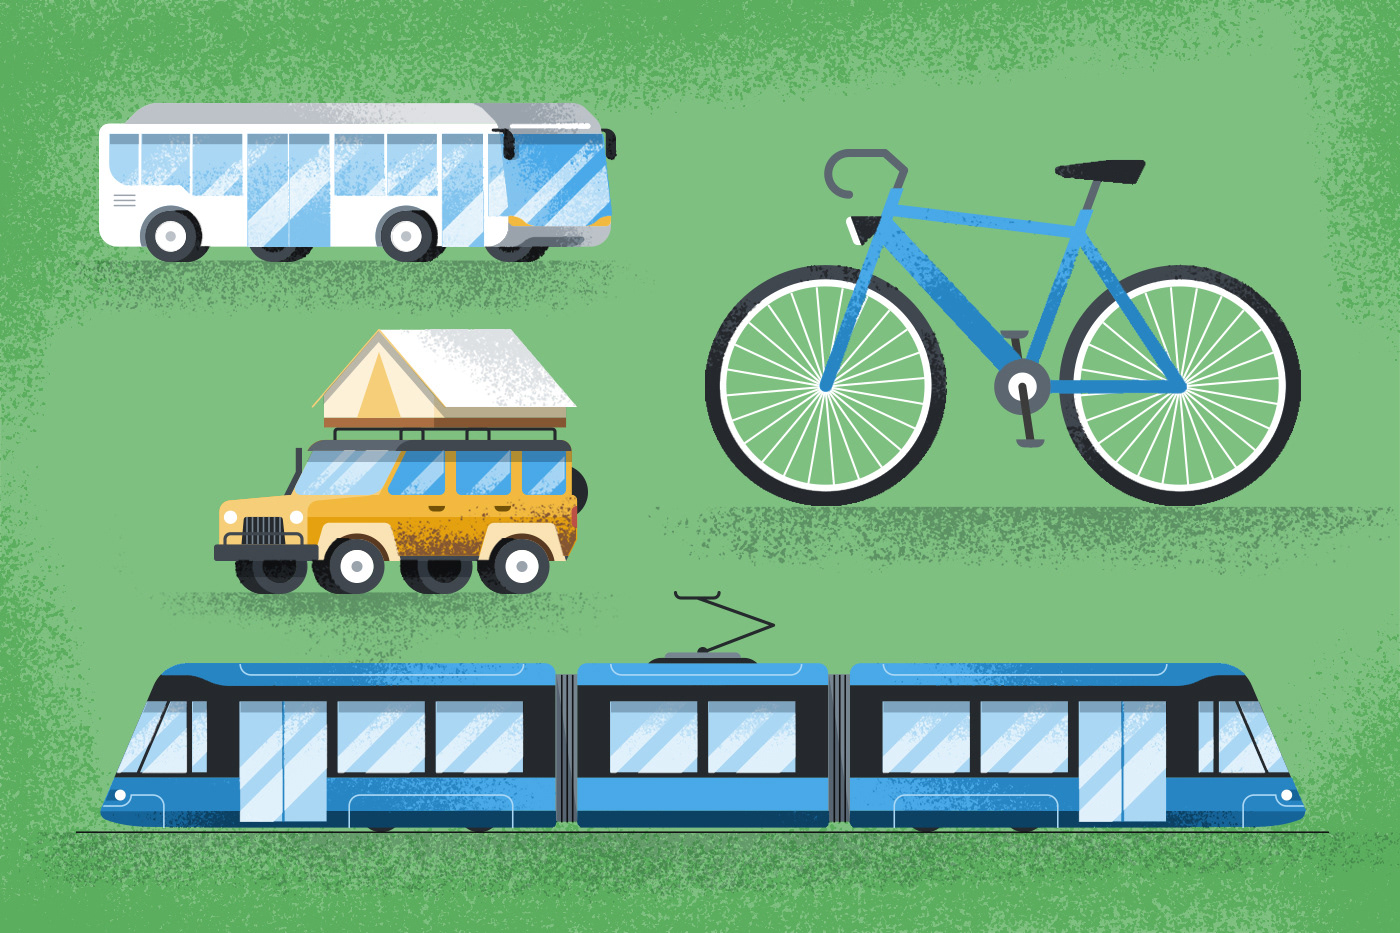 Illustrated icons of a bike, a bus, a jeep and a tram by Adrian Bauer